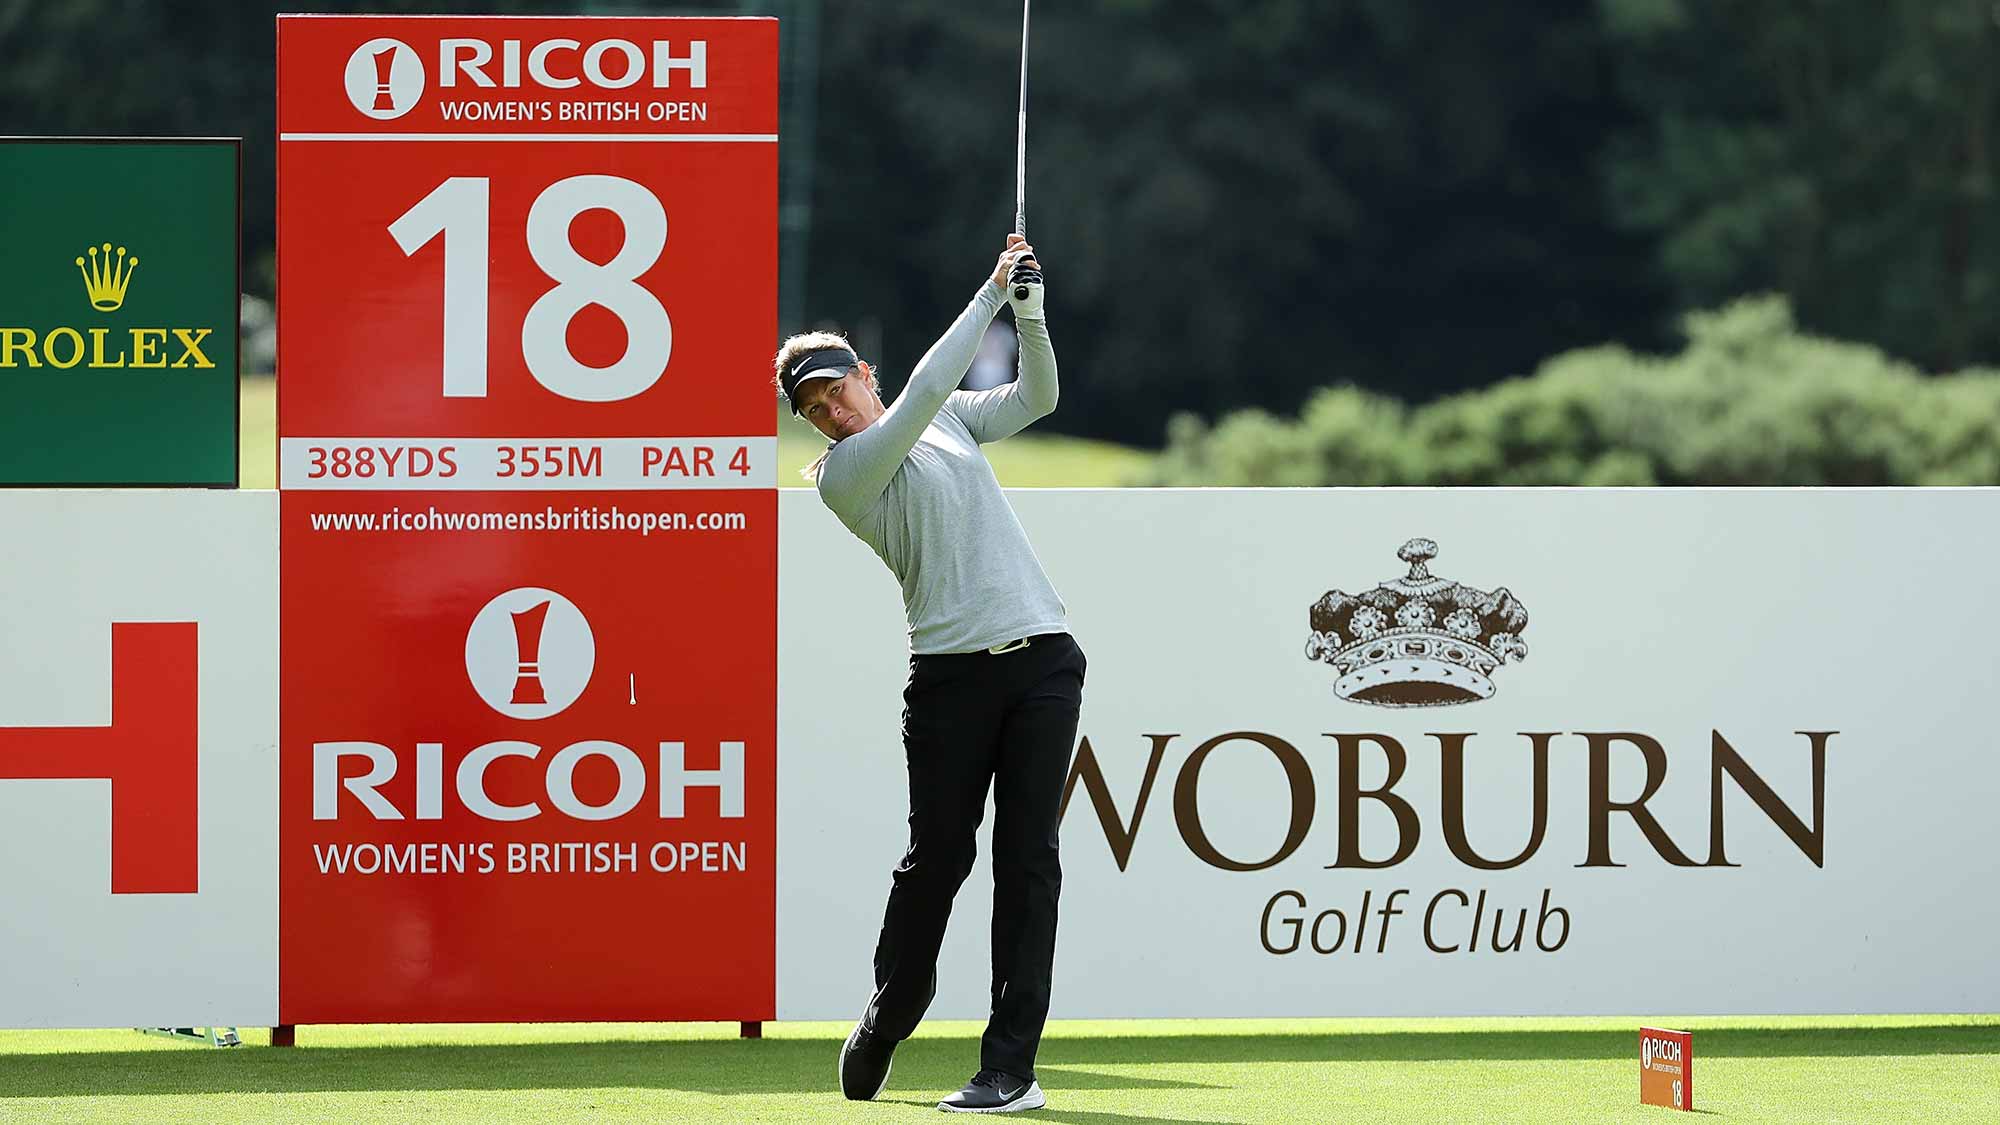 Suzann Pettersen of Norway tees off during a Pro-Am round ahead of the Ricoh Women's British Open